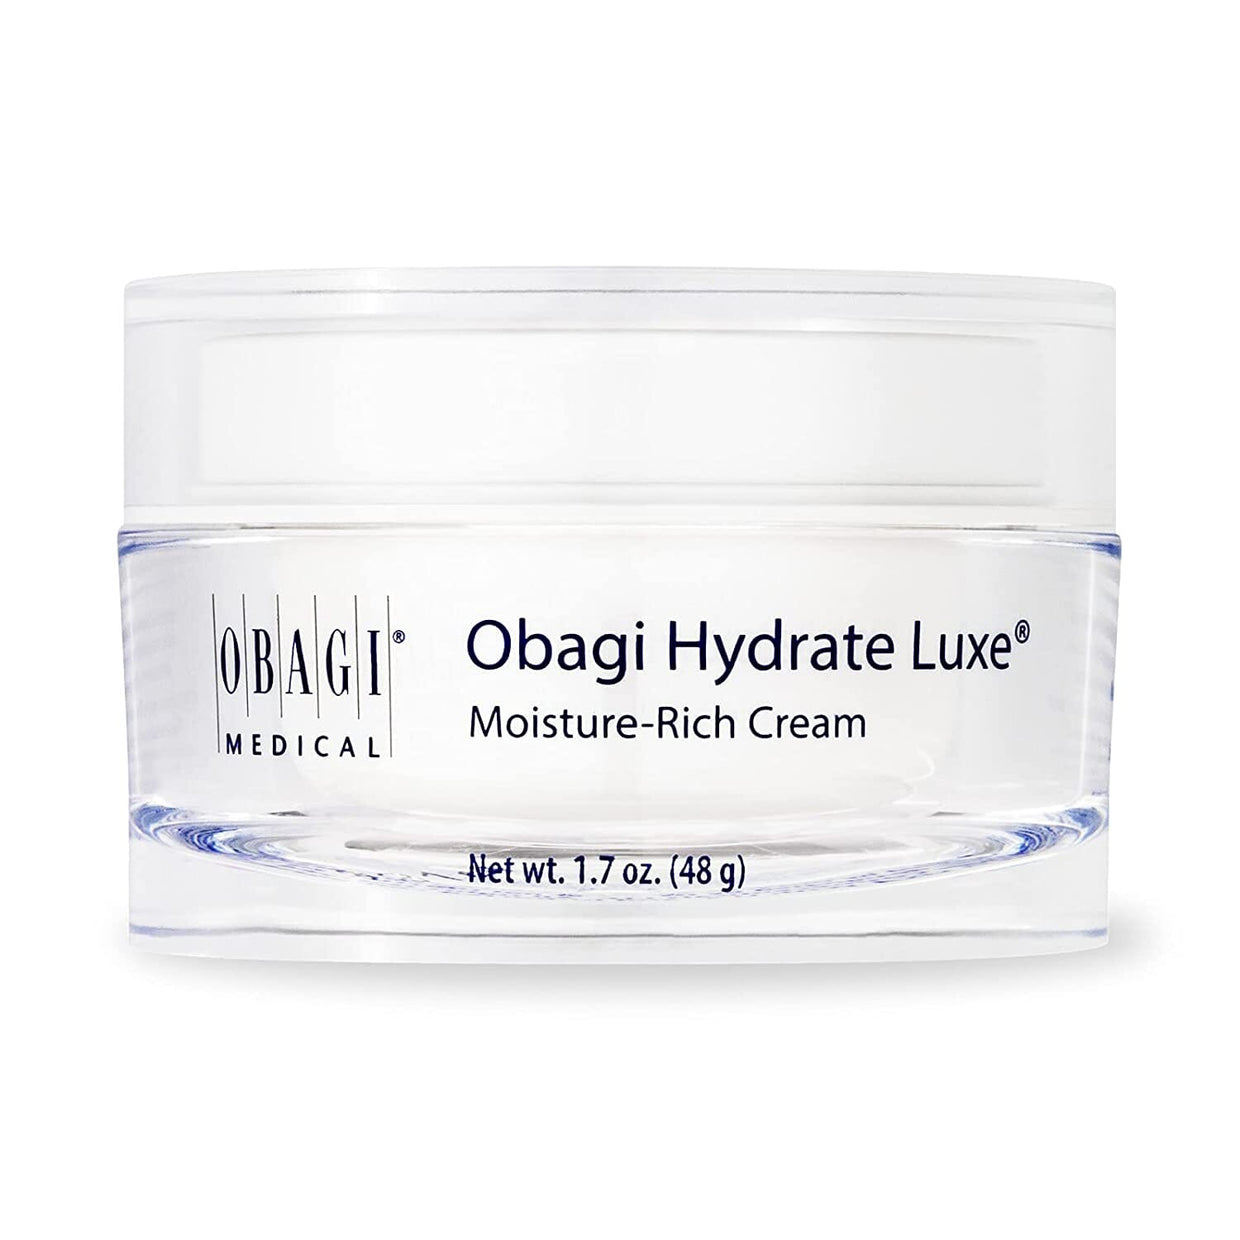 Obagi Hydrate Luxe Obagi 1.7 fl. oz. Shop at Exclusive Beauty Club